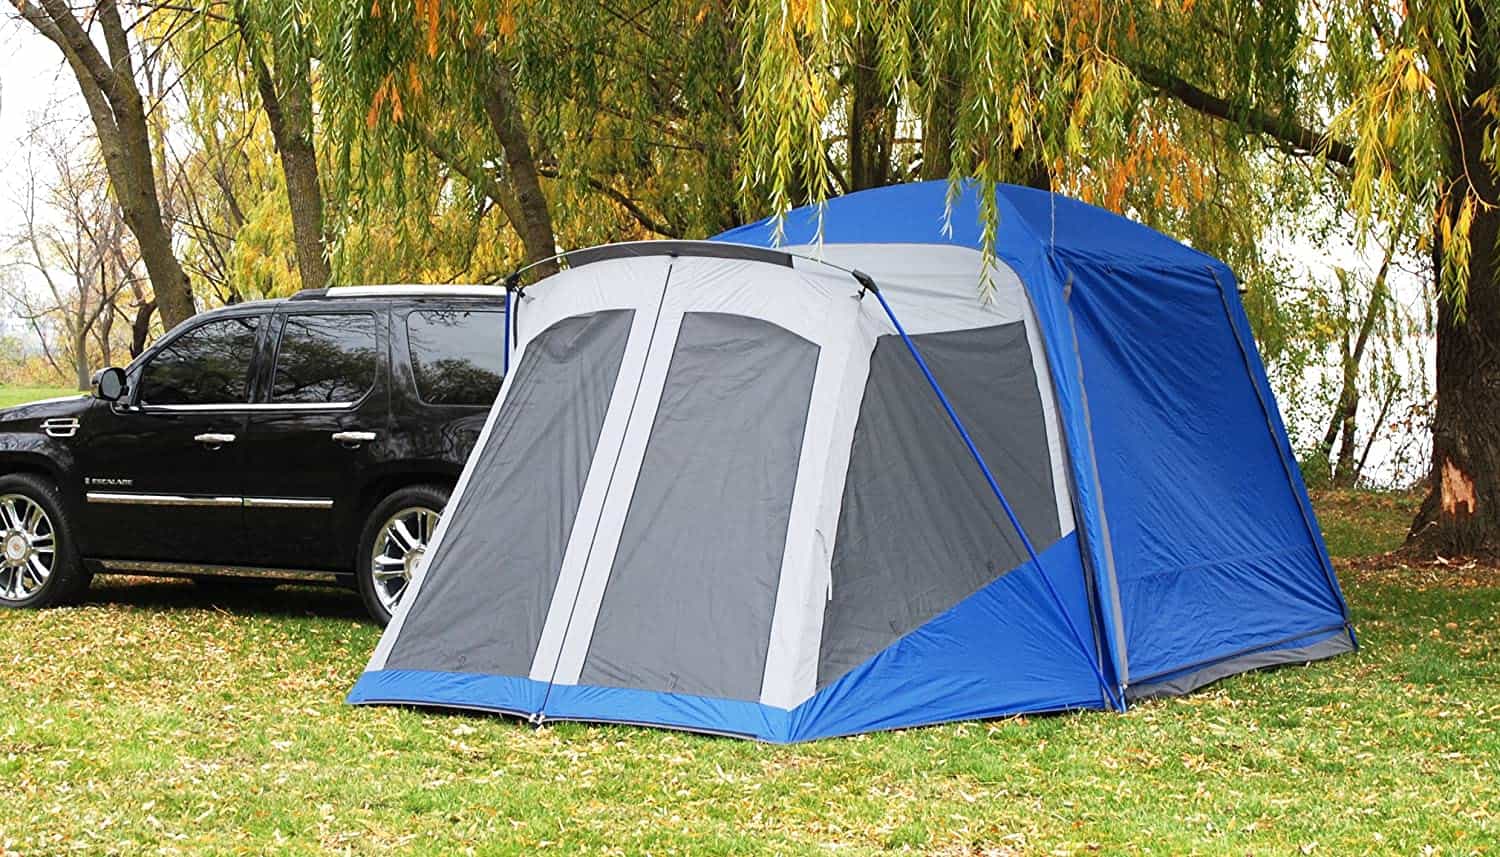 The 5 Best SUV Tents For Camping in 2021 - Able Camper